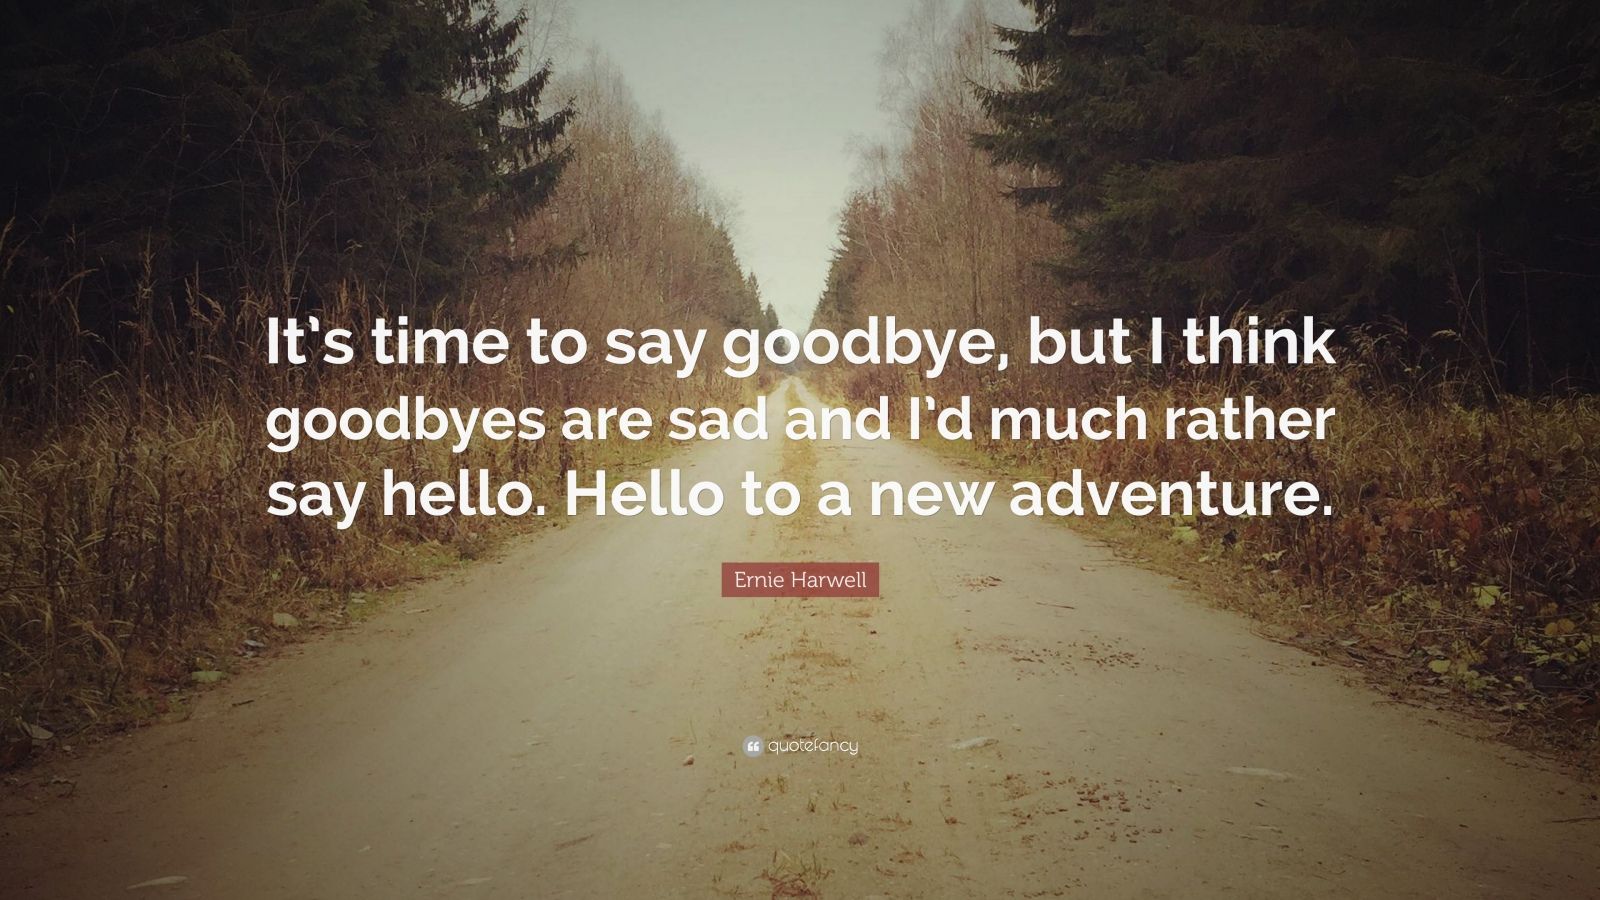 Ernie Harwell Quote: “It’s time to say goodbye, but I think goodbyes are sad and I ...1600 x 900